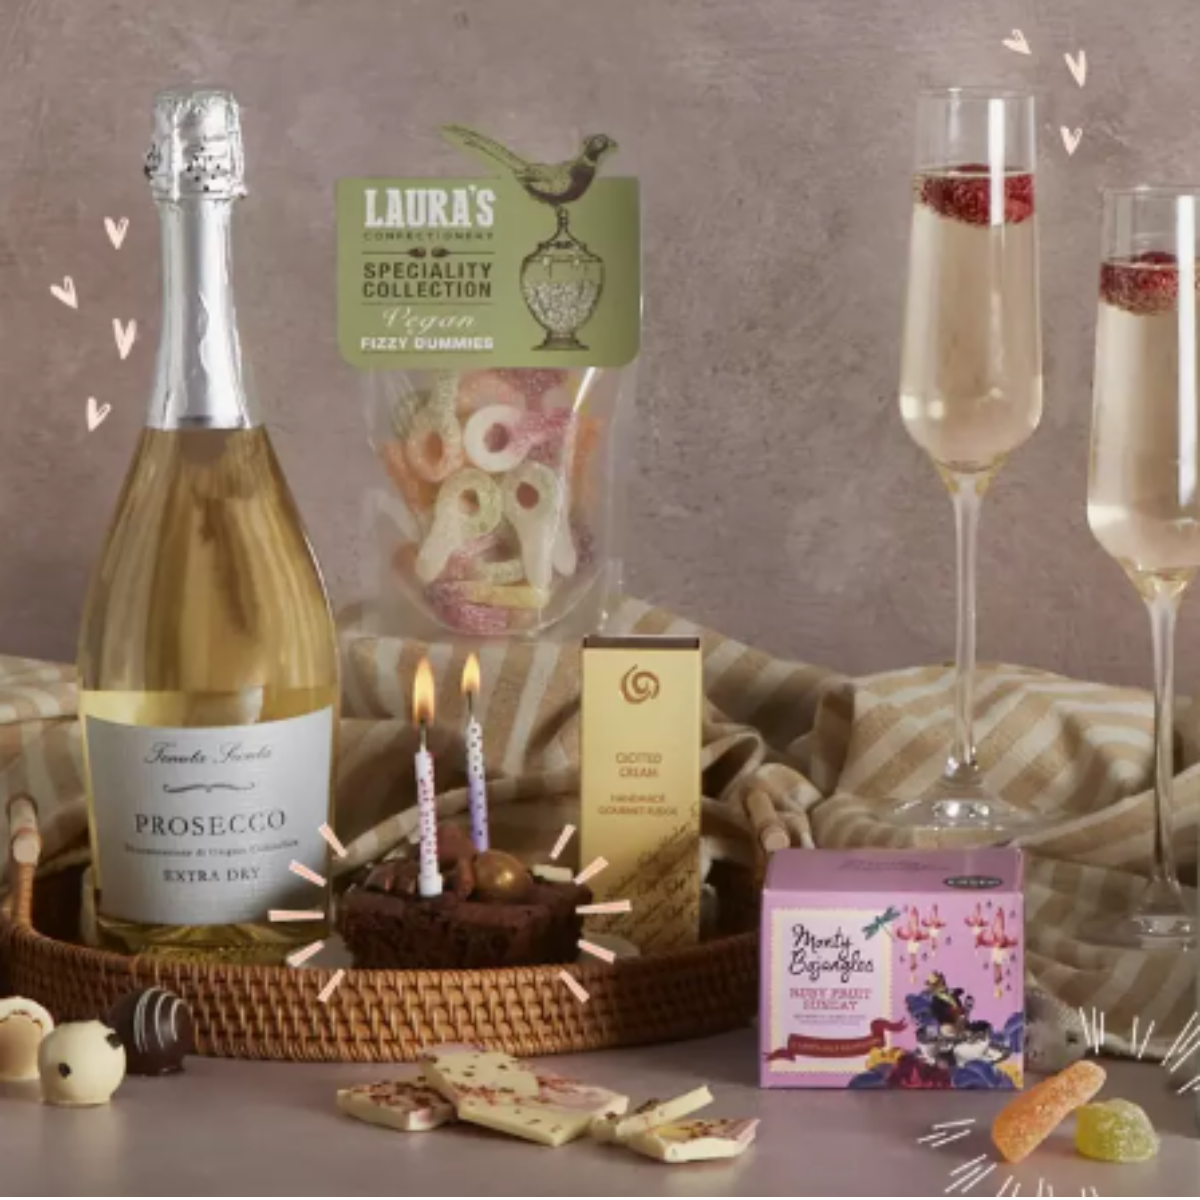 Champagne and other delicious products perfect for a birthday gift